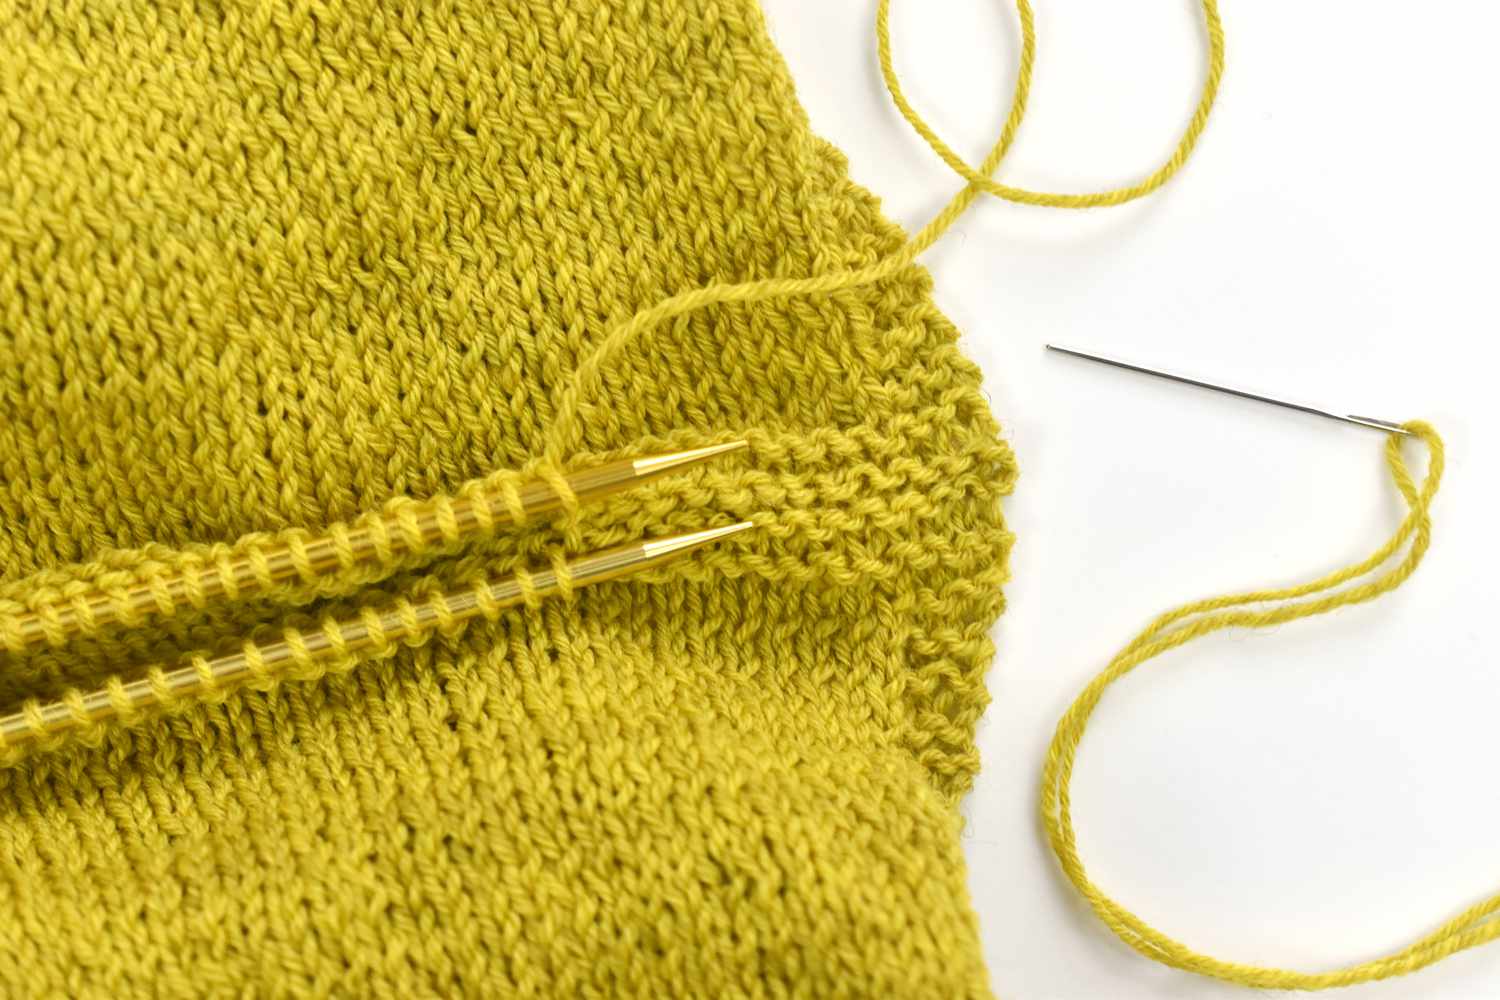 Grafting the shoulders of a tunic together with three needles